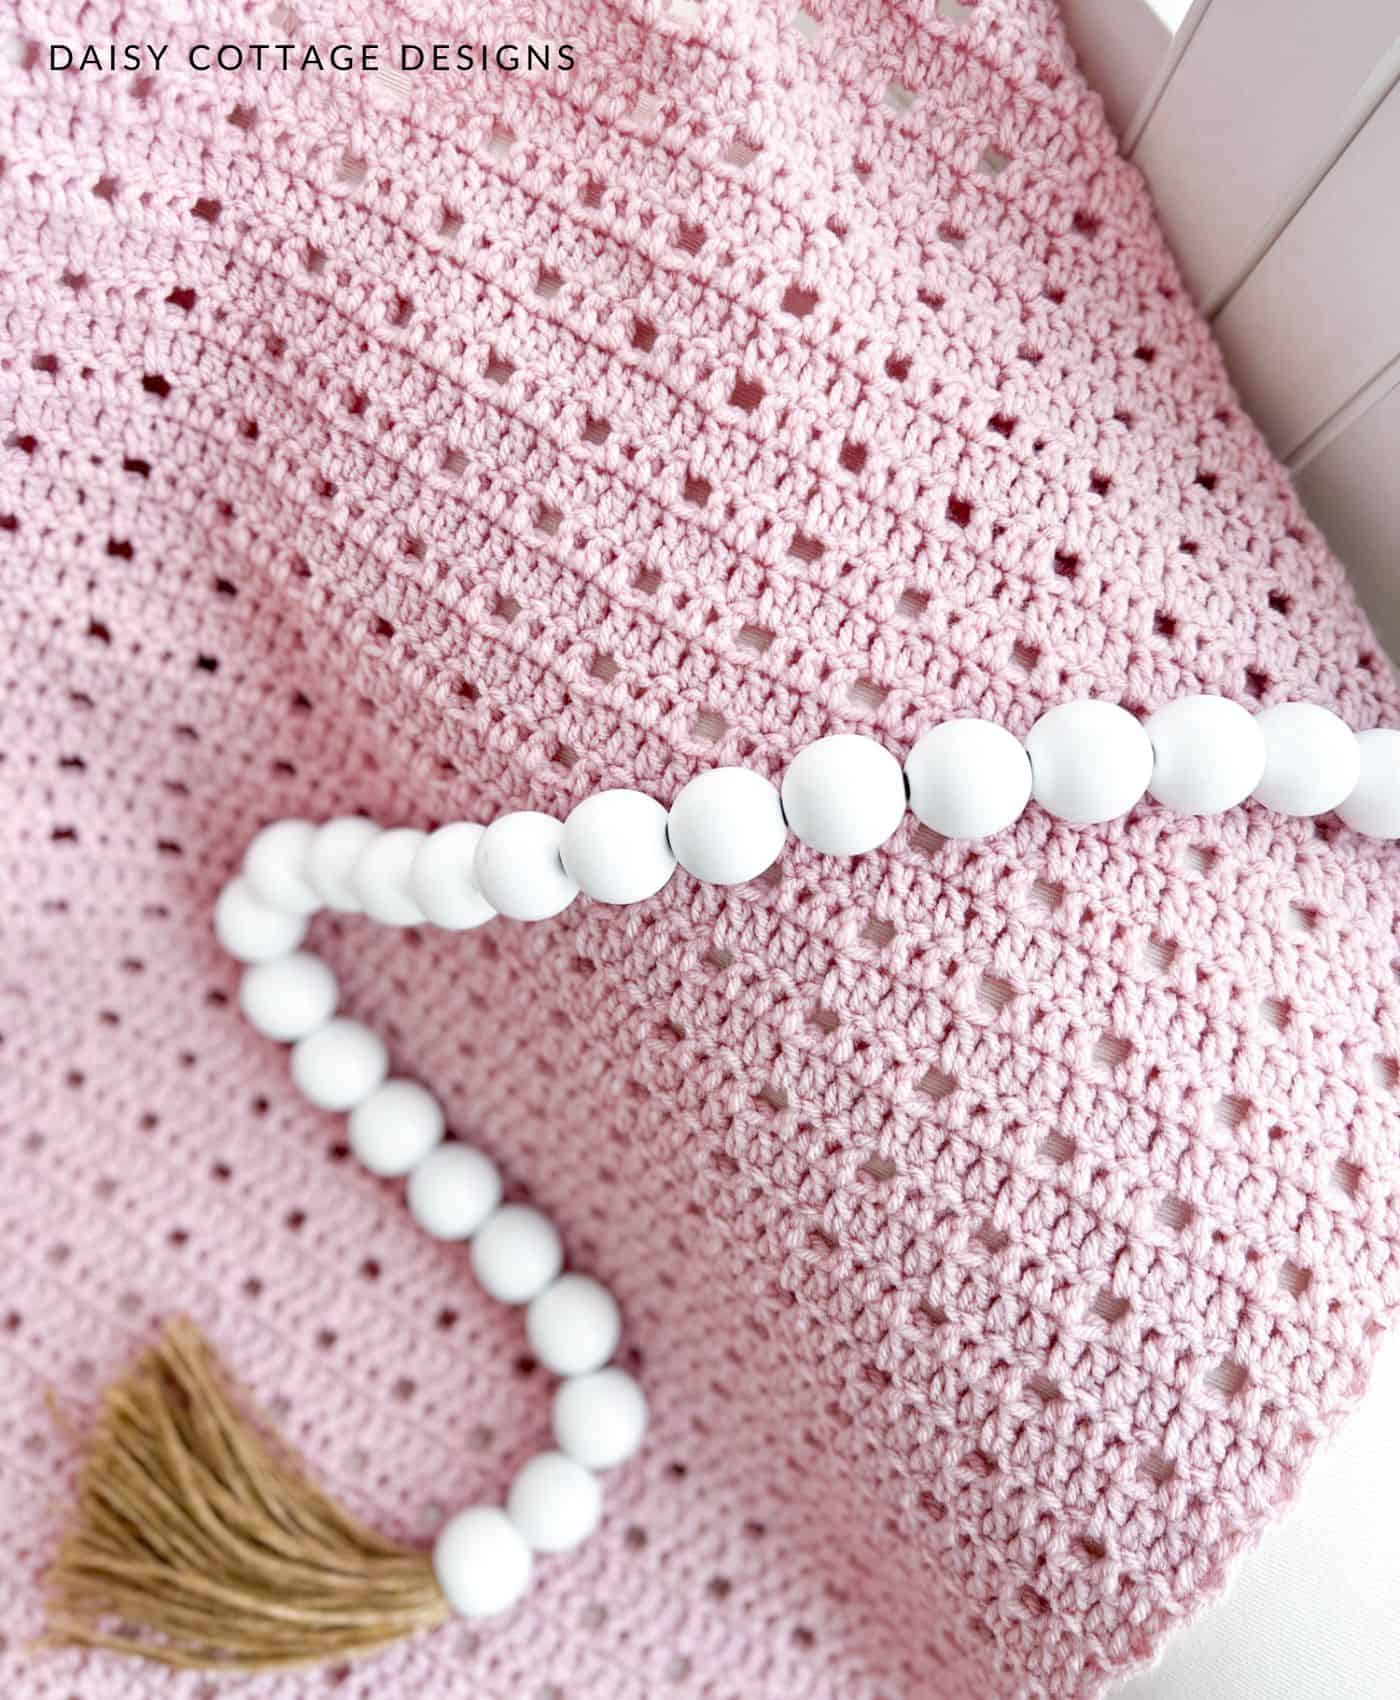 White beads and simple pink crochet baby blanket